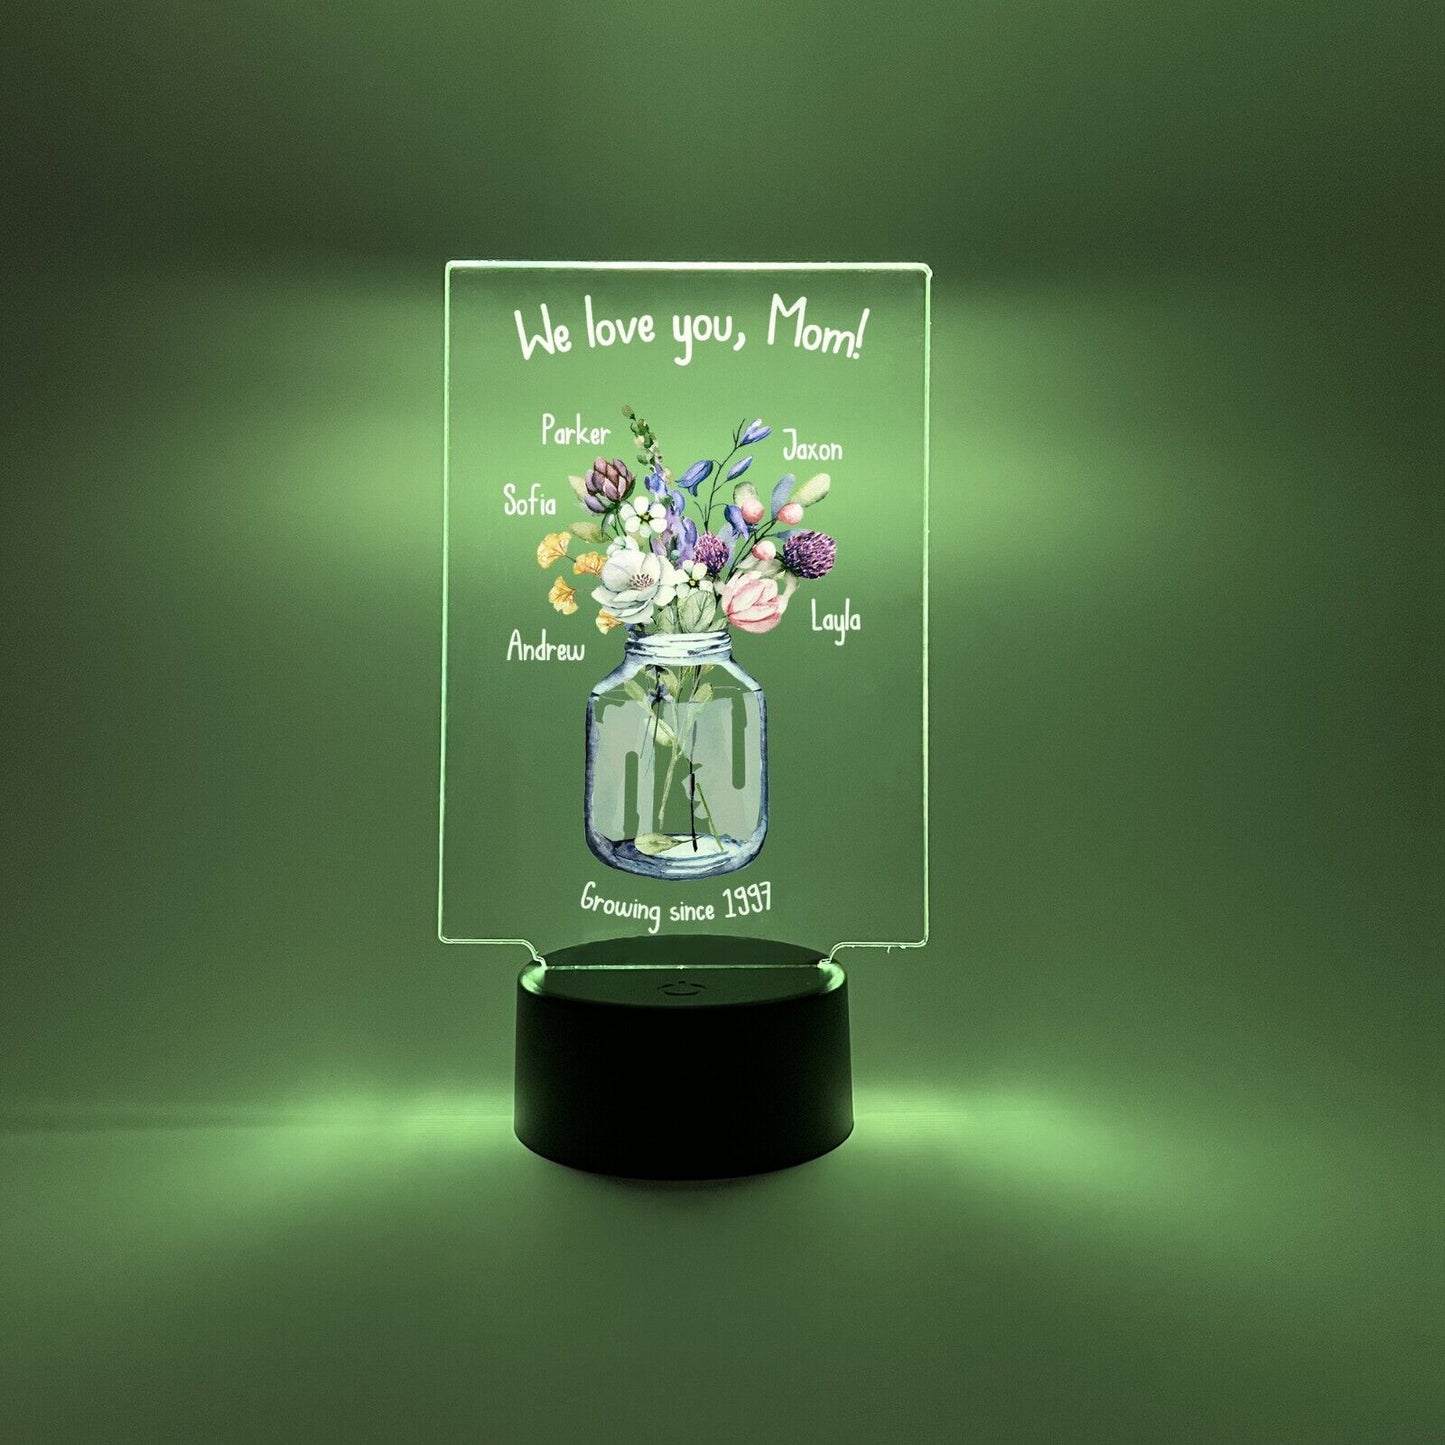 Personalized LED  16 Colors Light Up Flower Jar Mom Mother Day Desk Stand